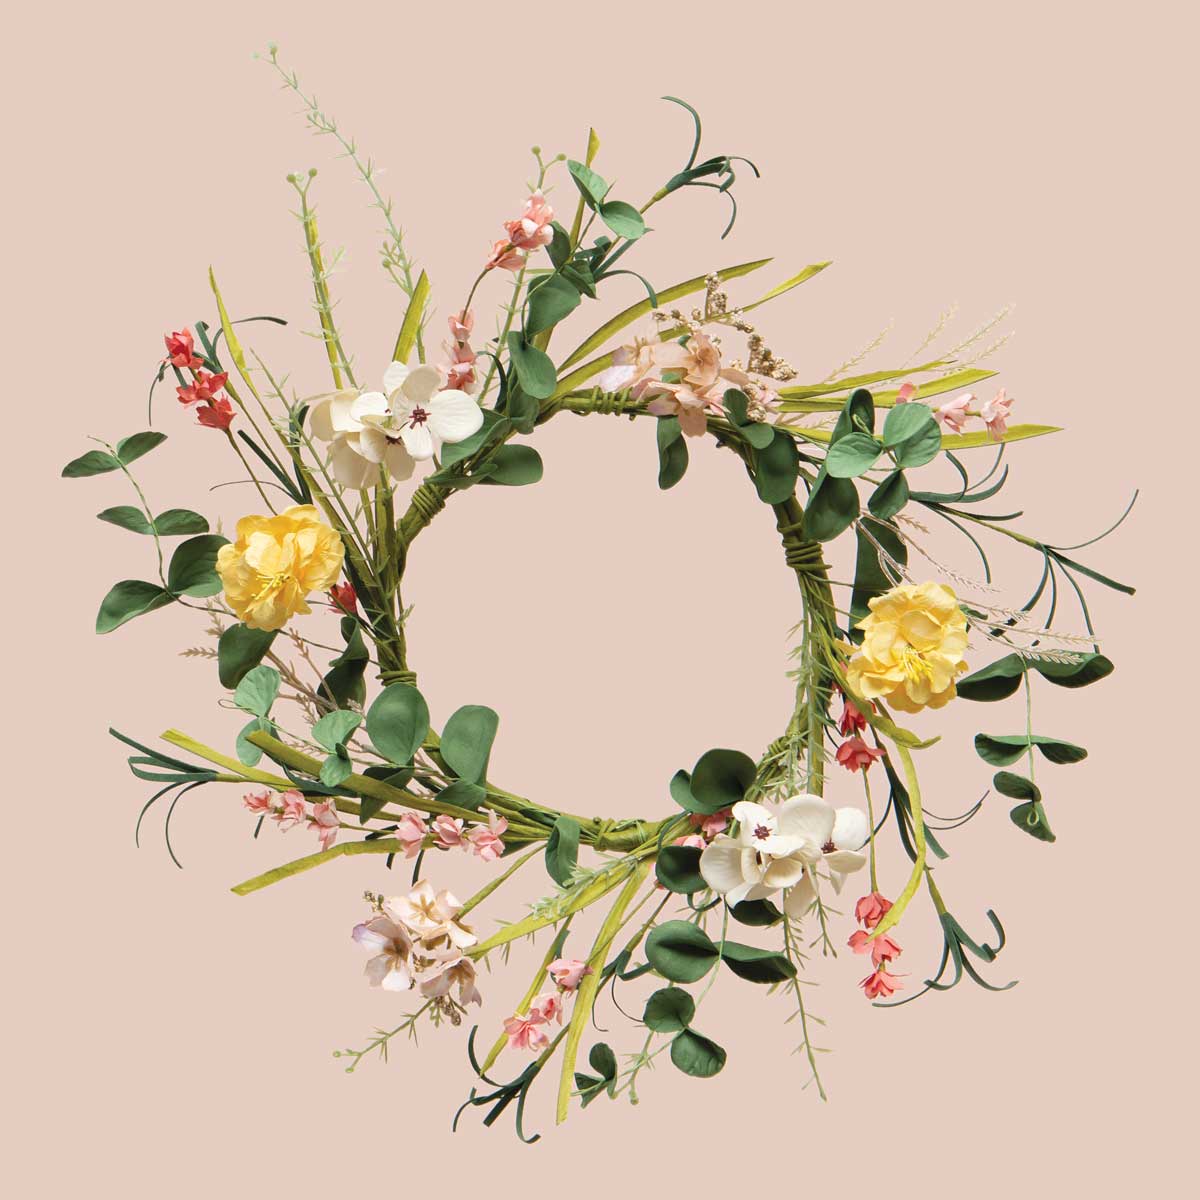 MINI WREATH WHIMSEY FLORAL 17IN (INNER RING 6.5IN)